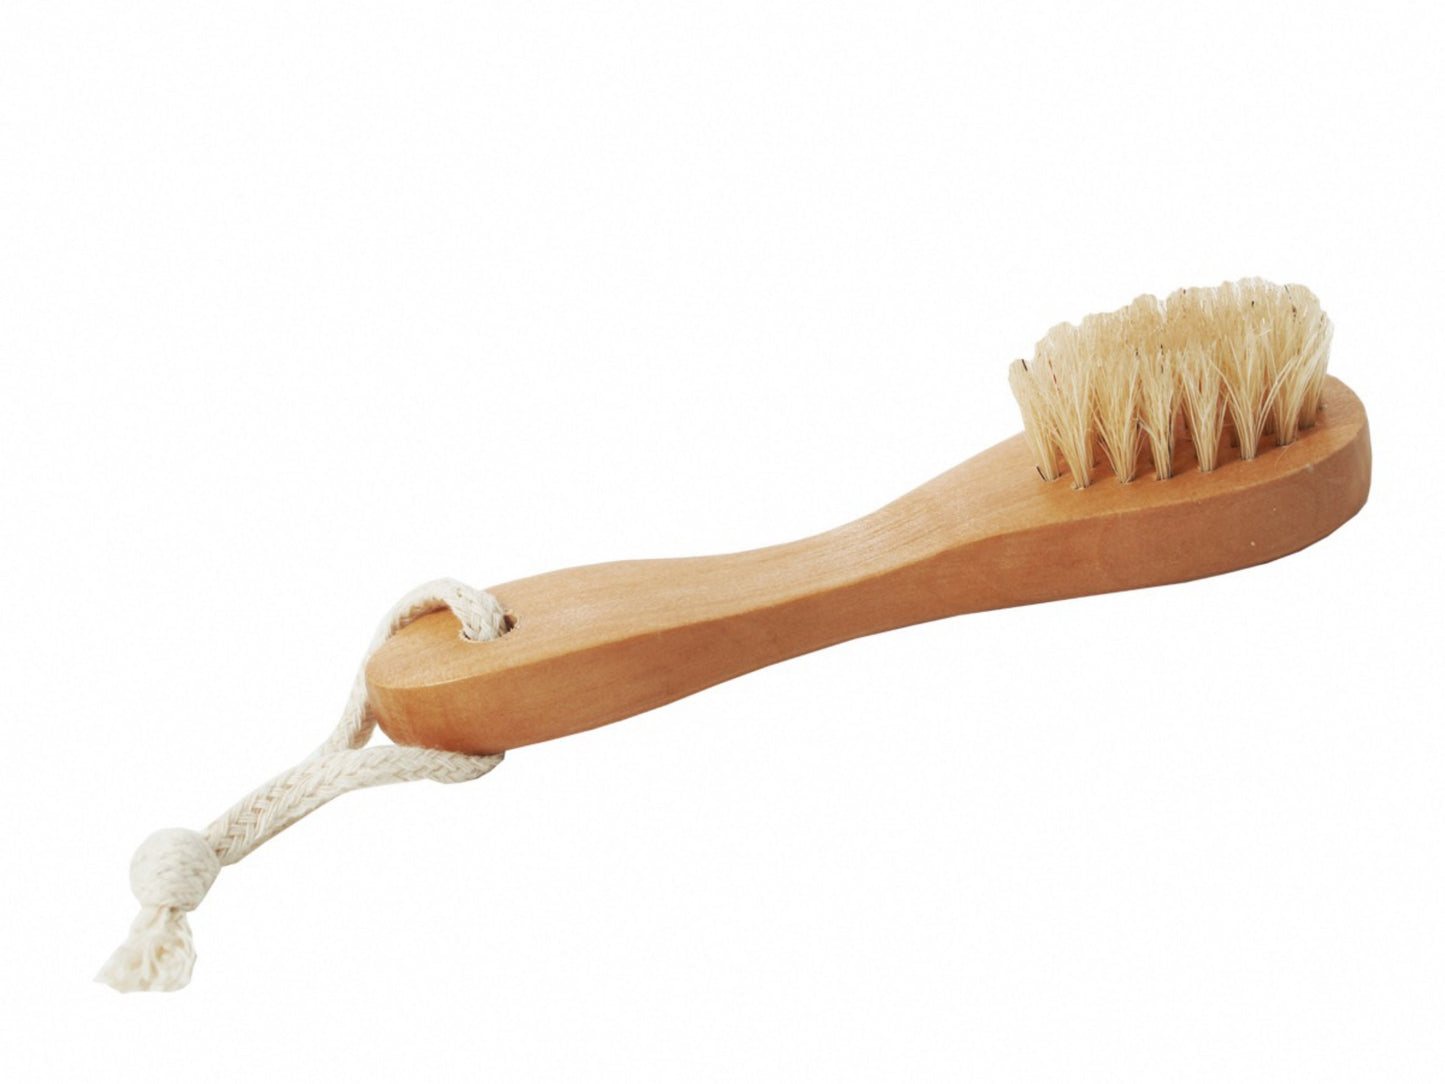 Natural Exfoliating Face Brush - Funky Soap Shop